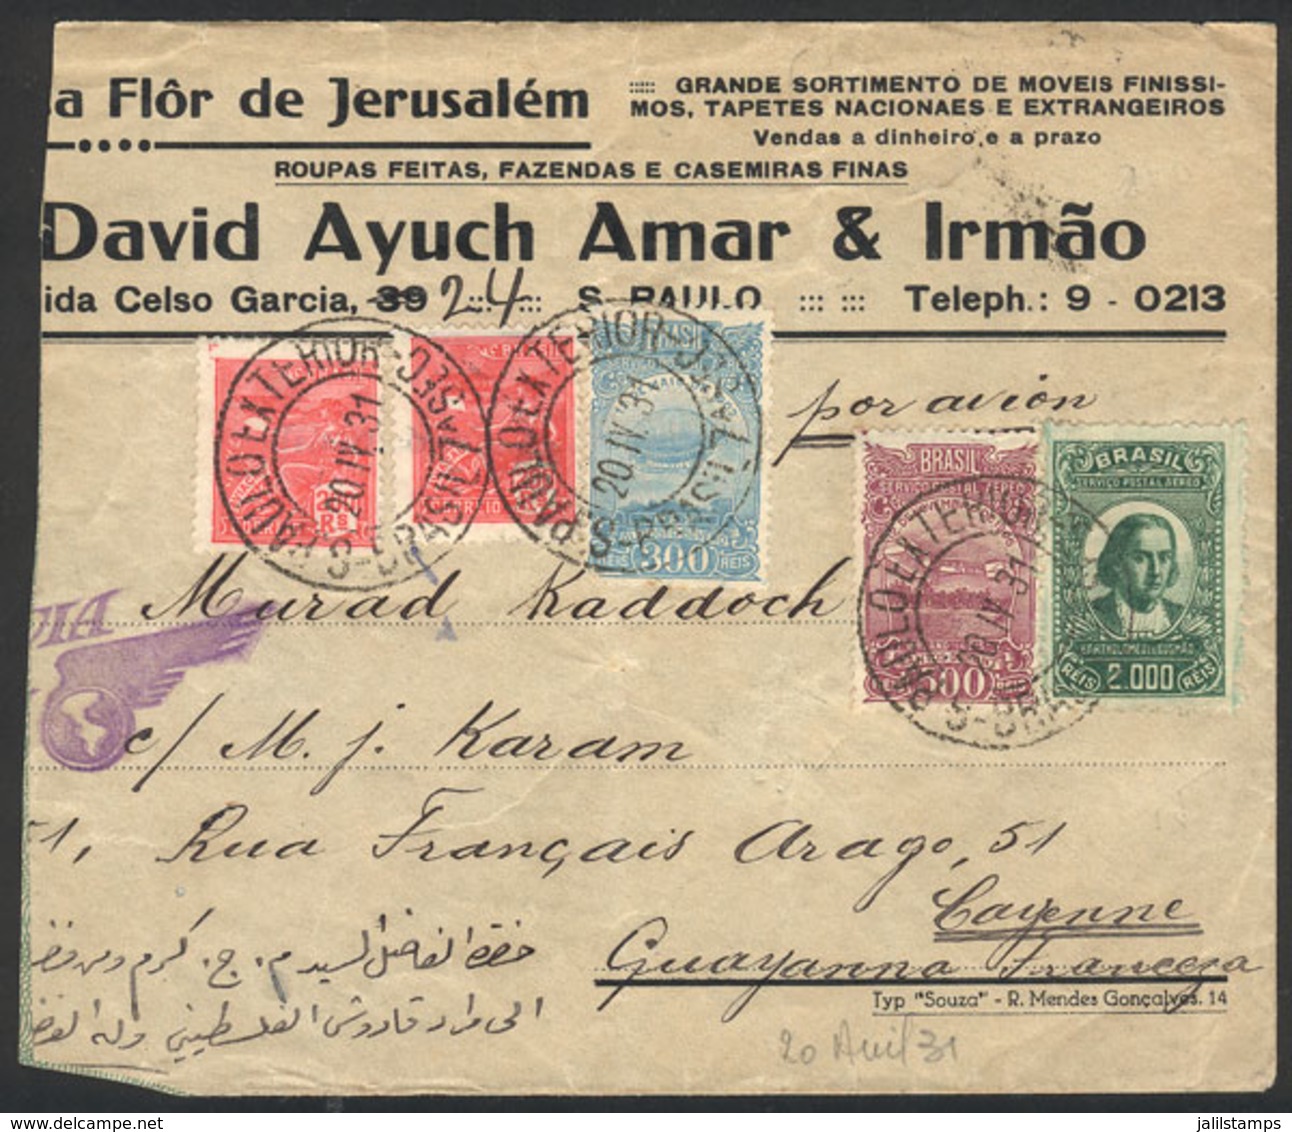 BRAZIL: Airmail Cover Sent From Sao Paulo To FRENCH GUIANA On 20/AP/1931, Franked With 3,200Rs., Fine Quality, Rare Dest - Vorphilatelie